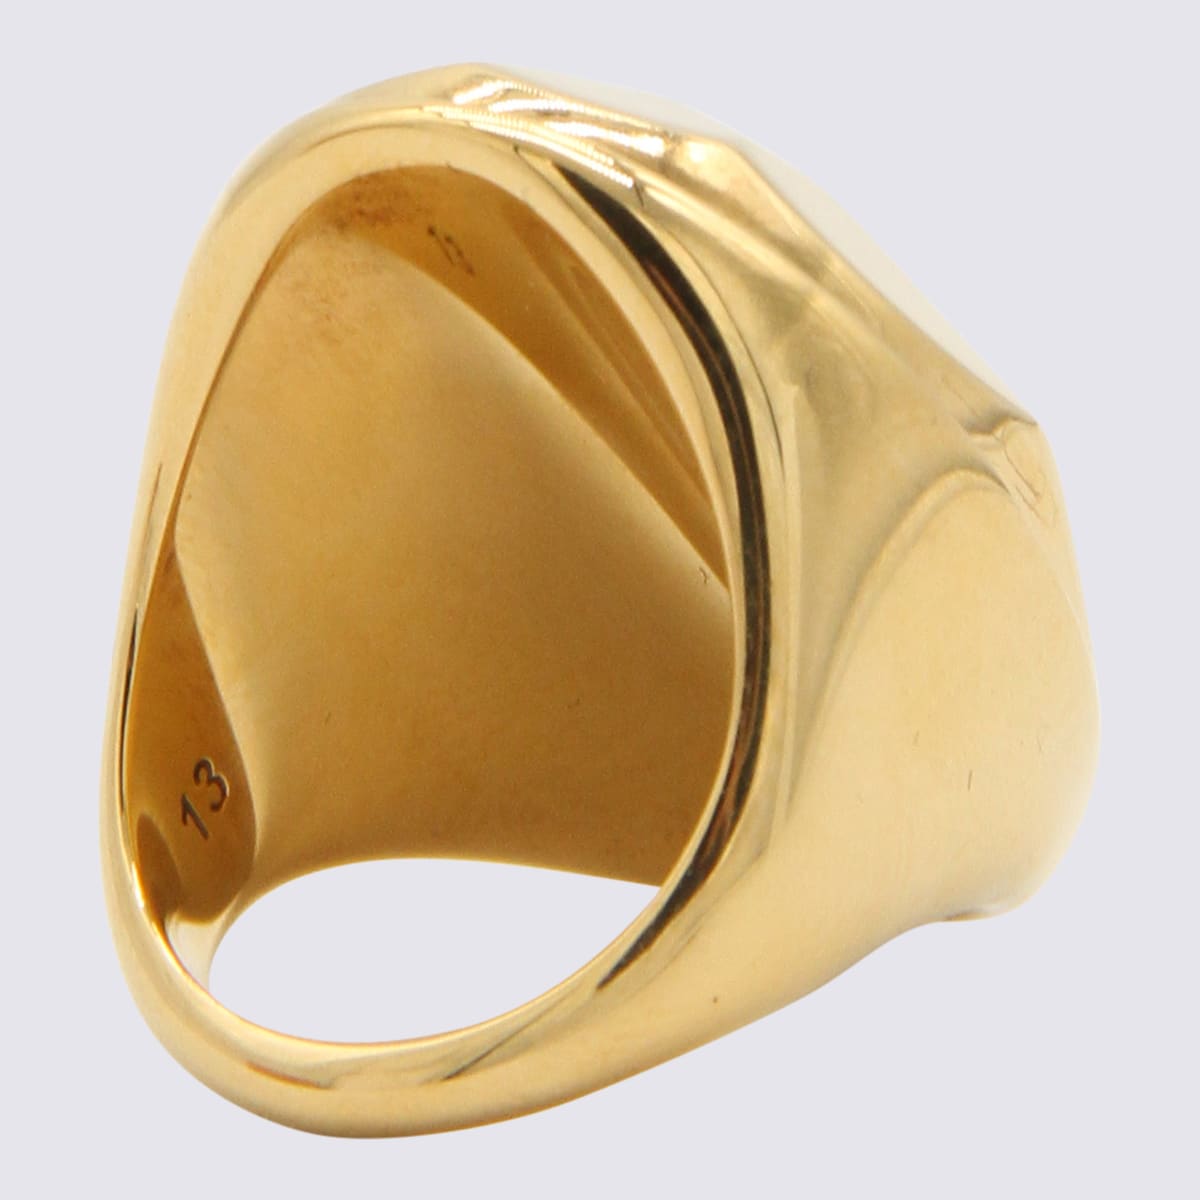 Antique Gold Metal The Faceted Stone Ring